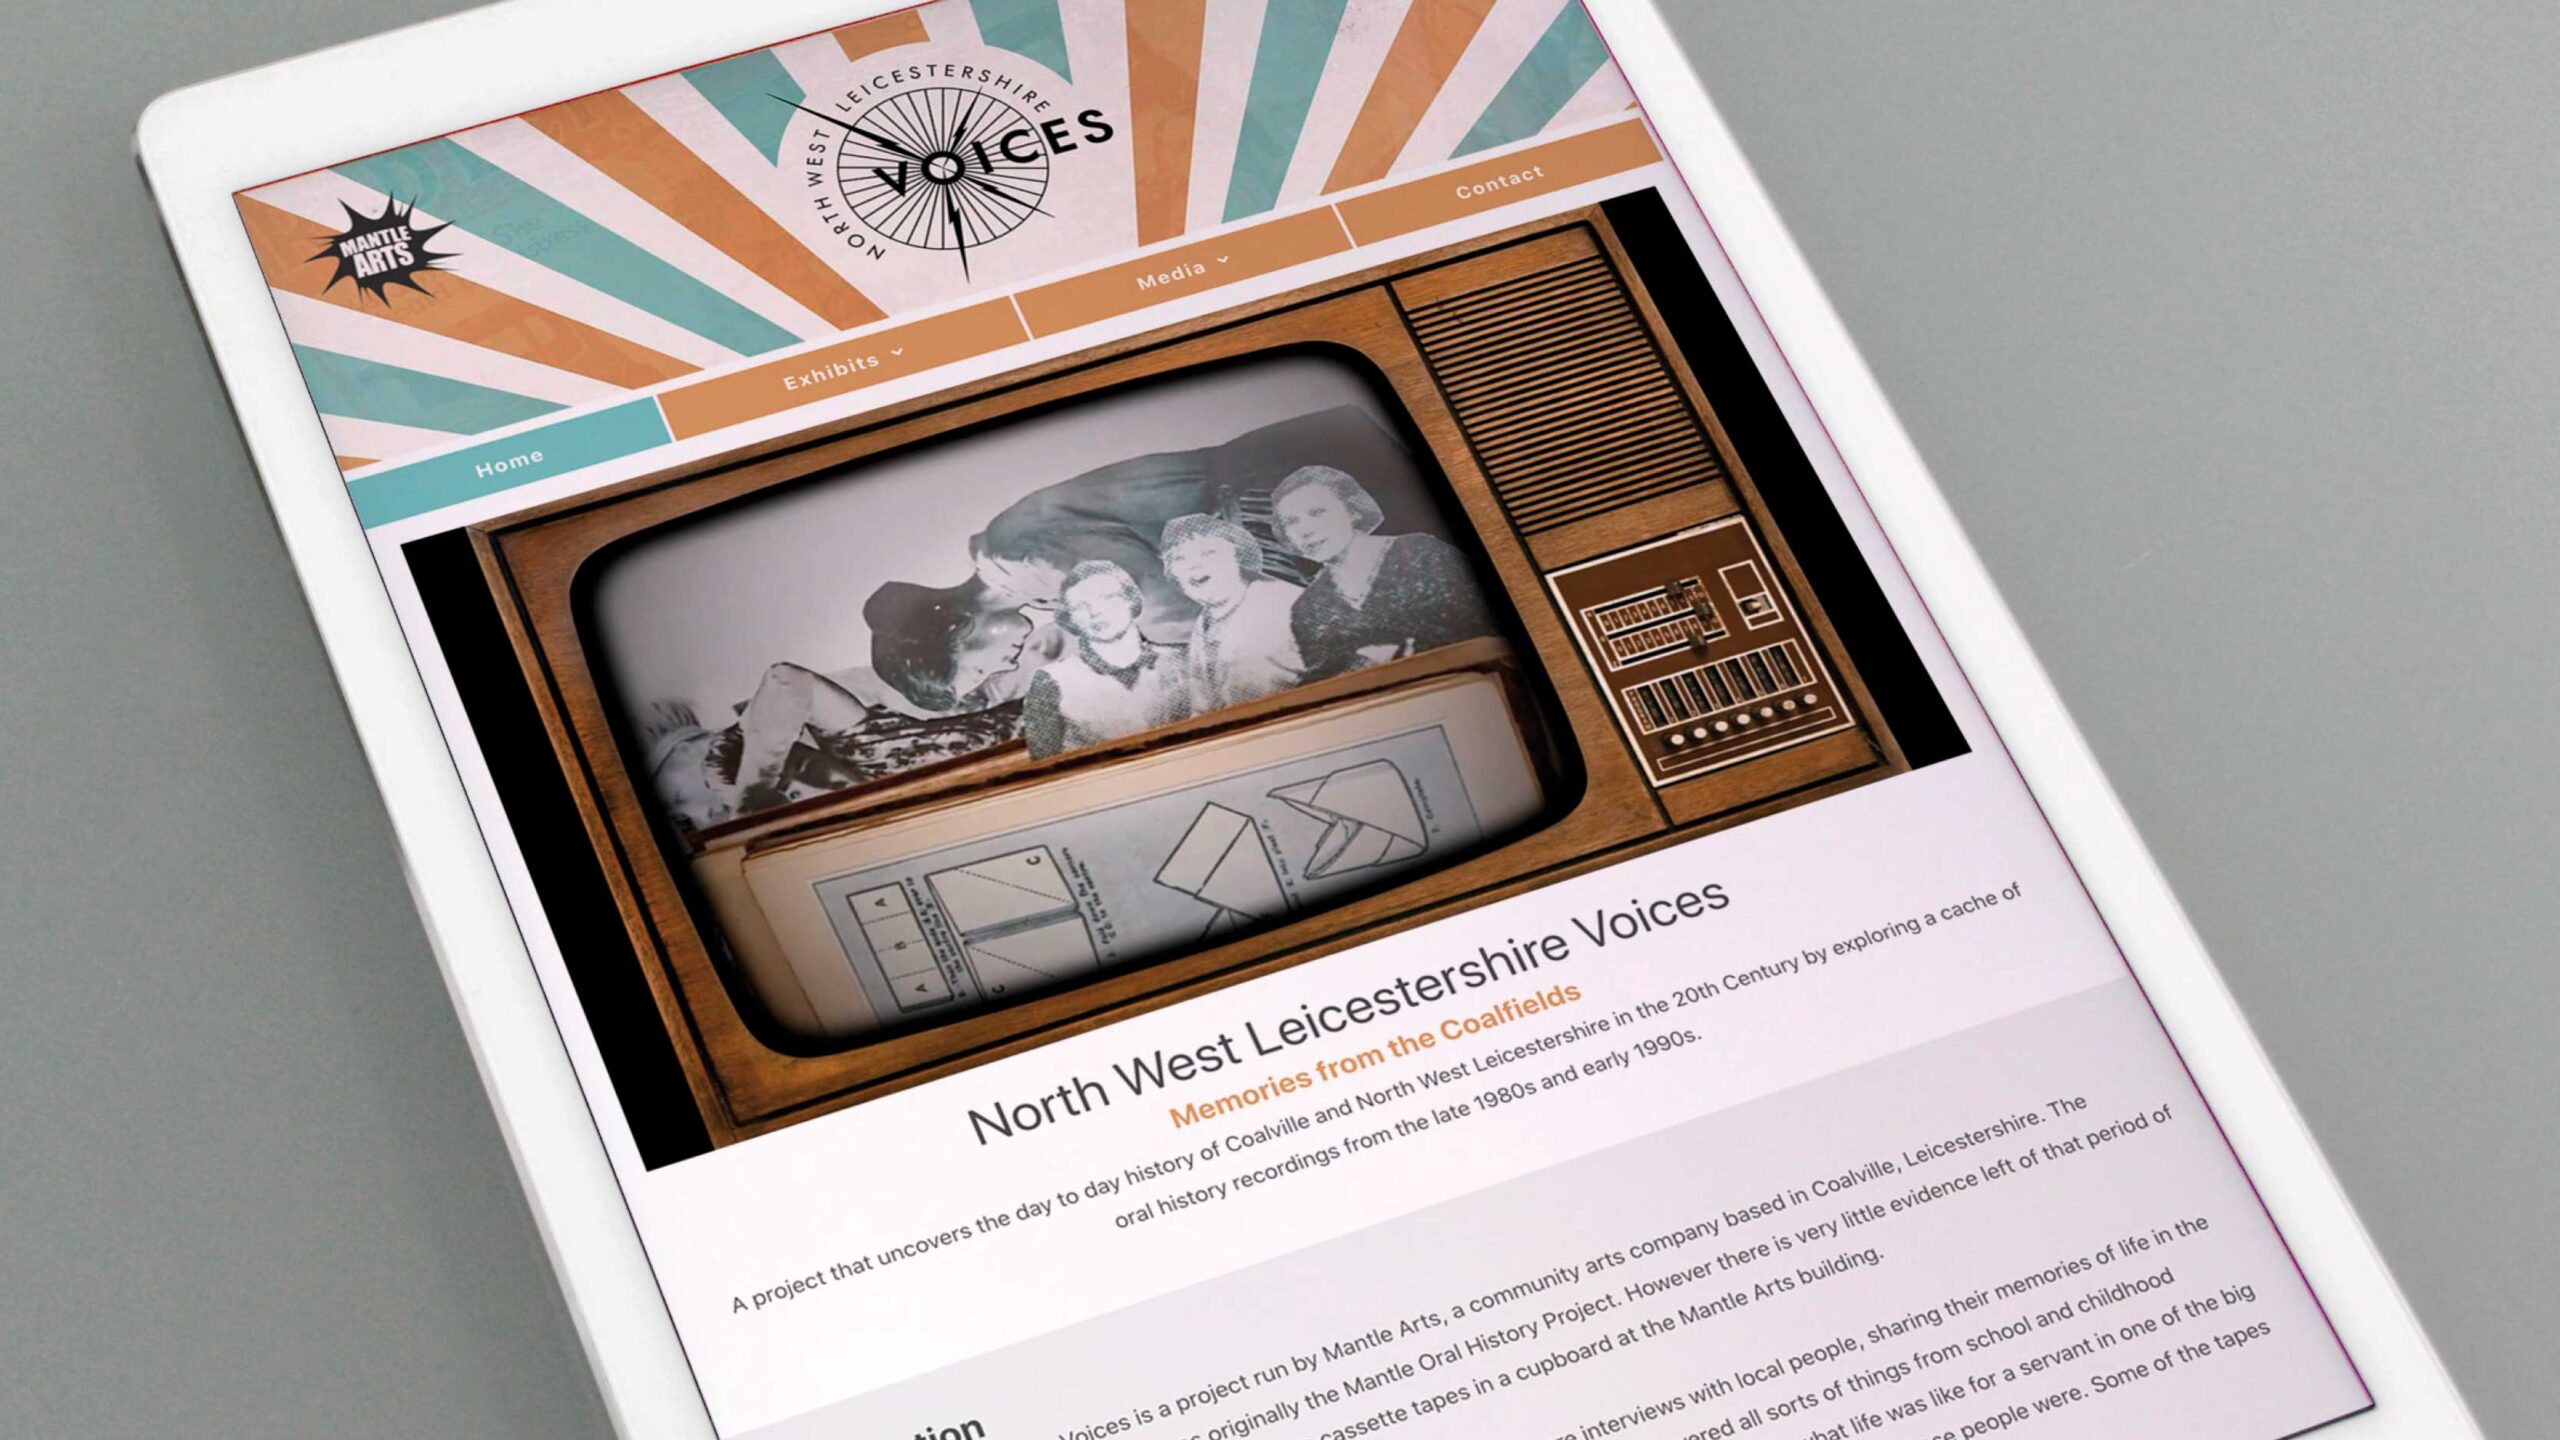 NORTH WEST LEICESTERSHIRE VOICES WEBSITE